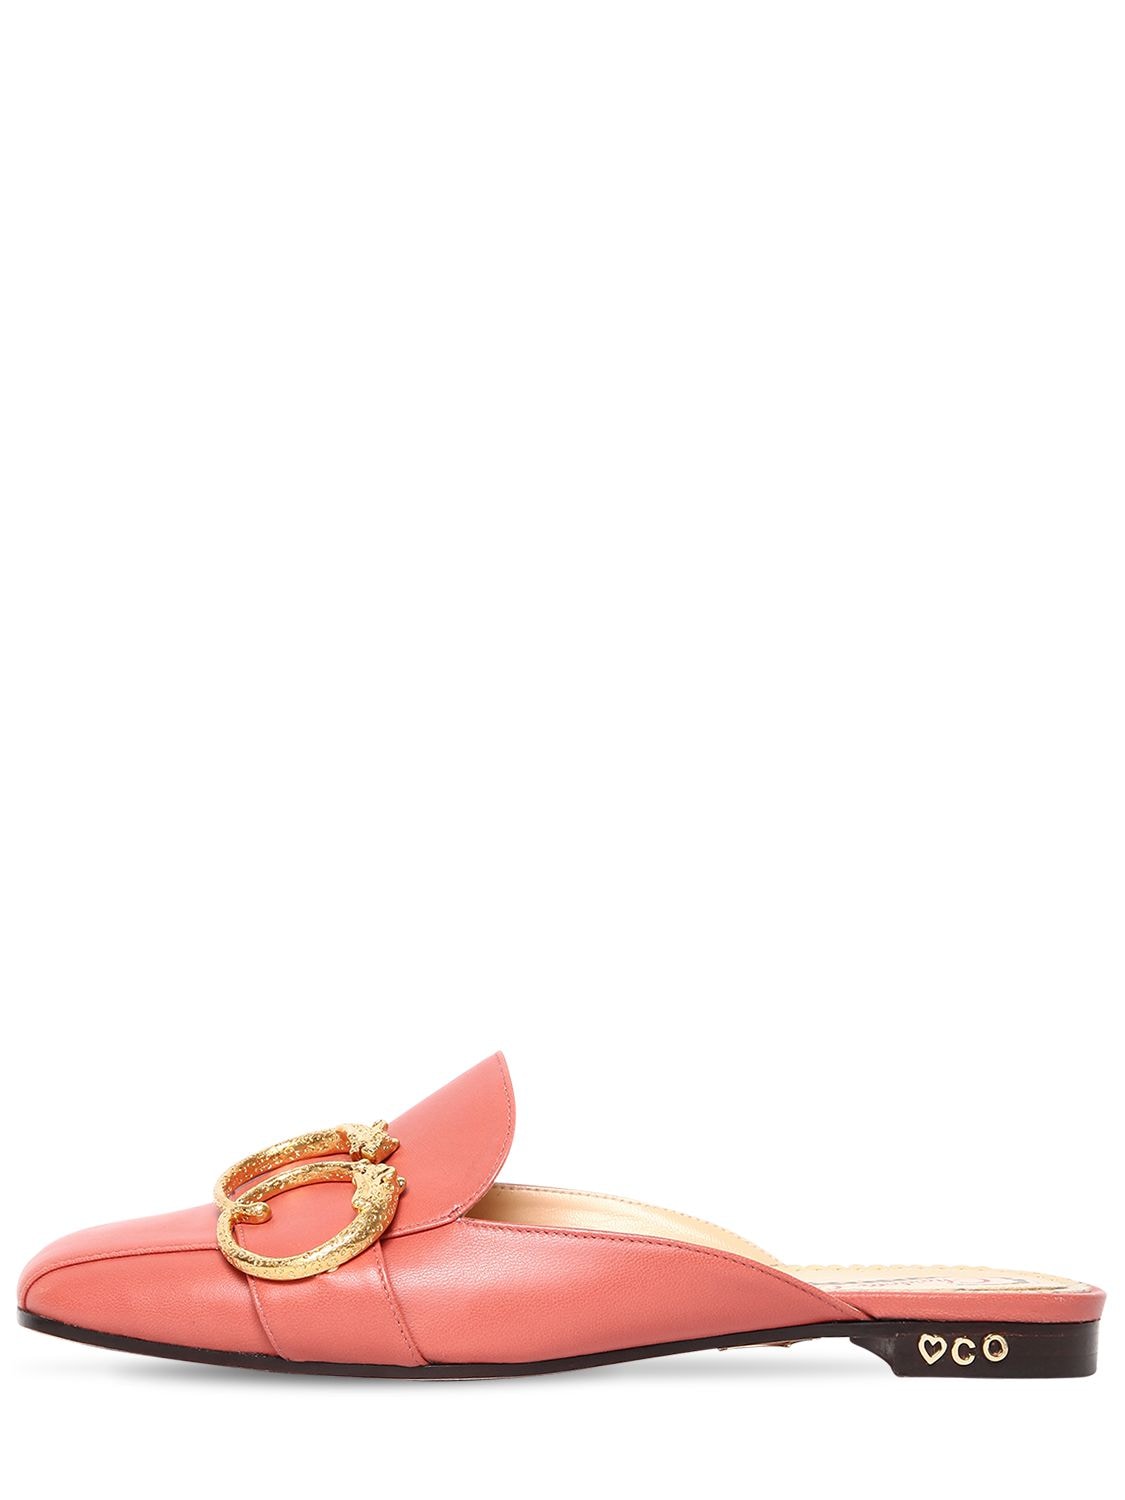 Charlotte Olympia 10mm Leather Mules W/ Buckle In Antique Rose